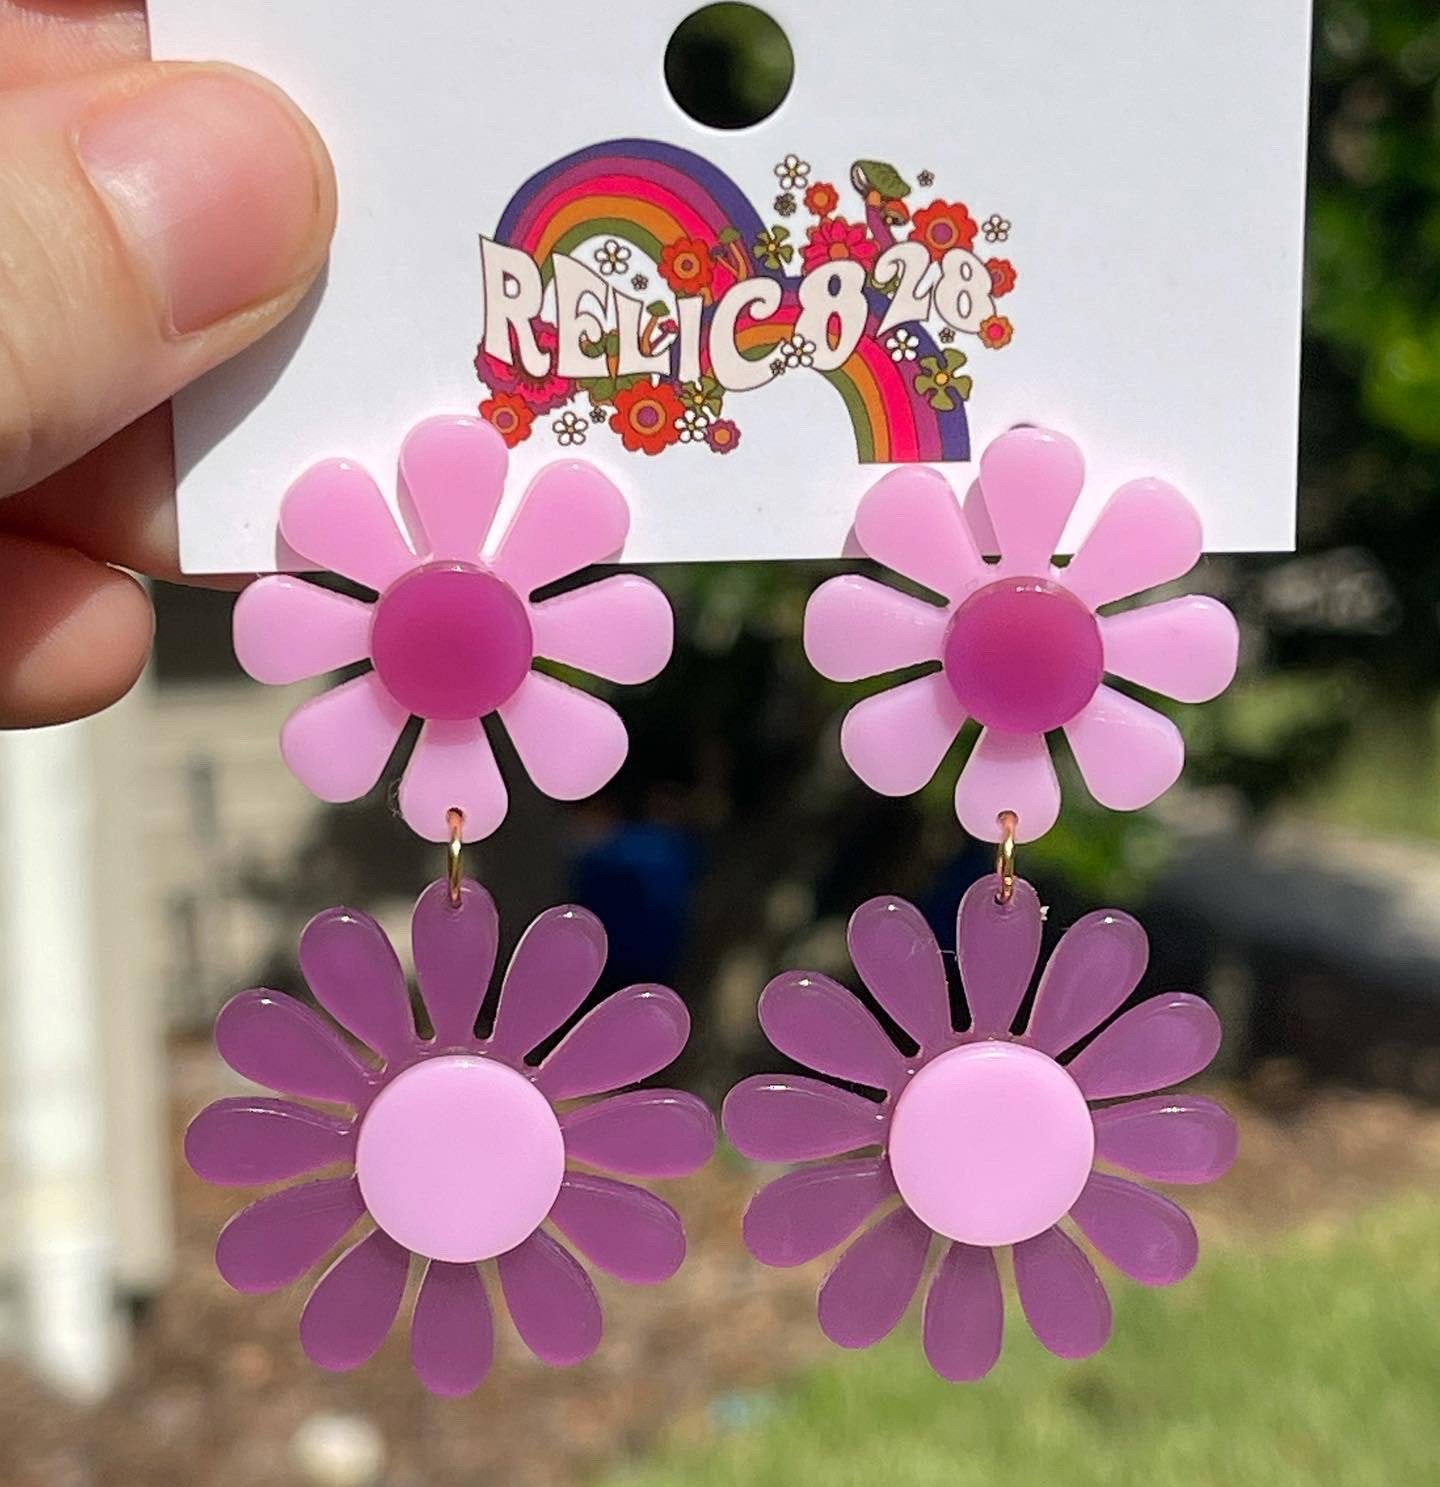 60s Pink and Purple Mod Flower Earrings - Relic828